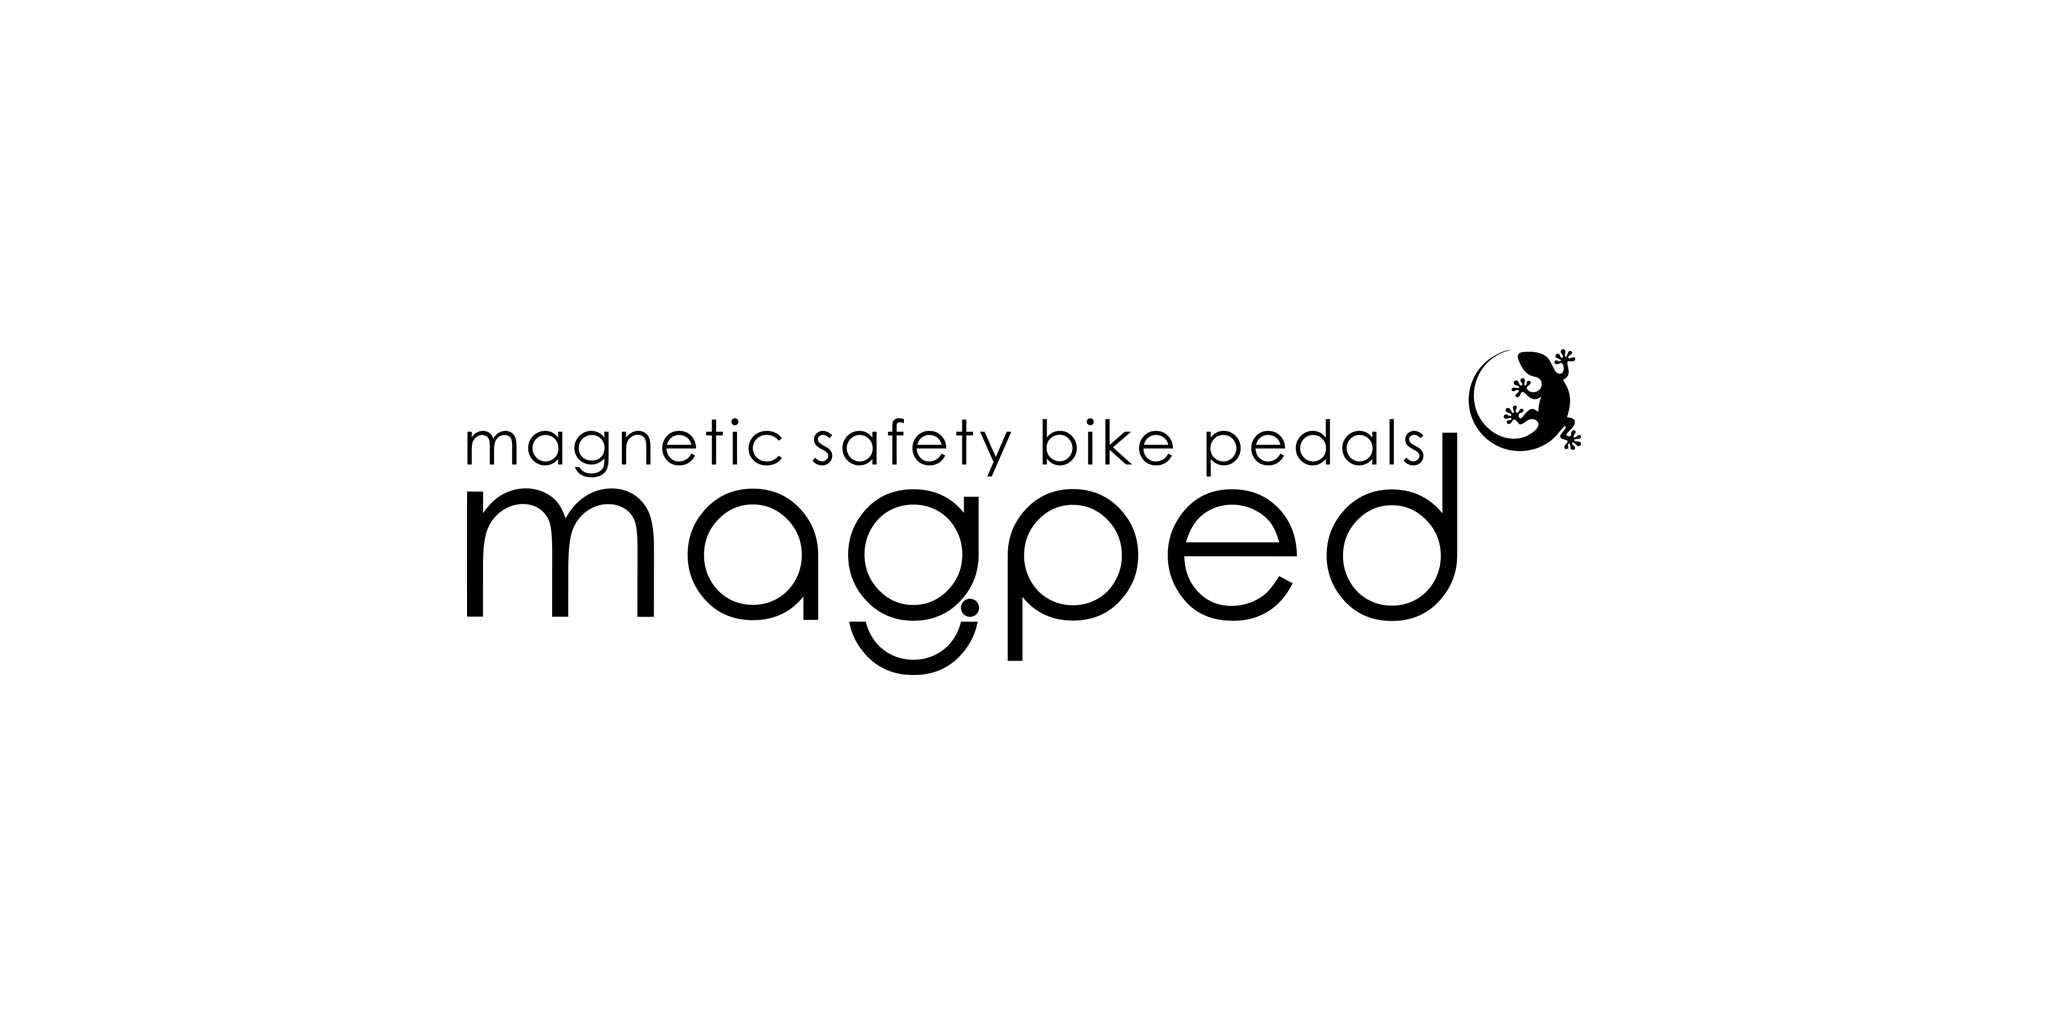 Magped logo safety pedals 